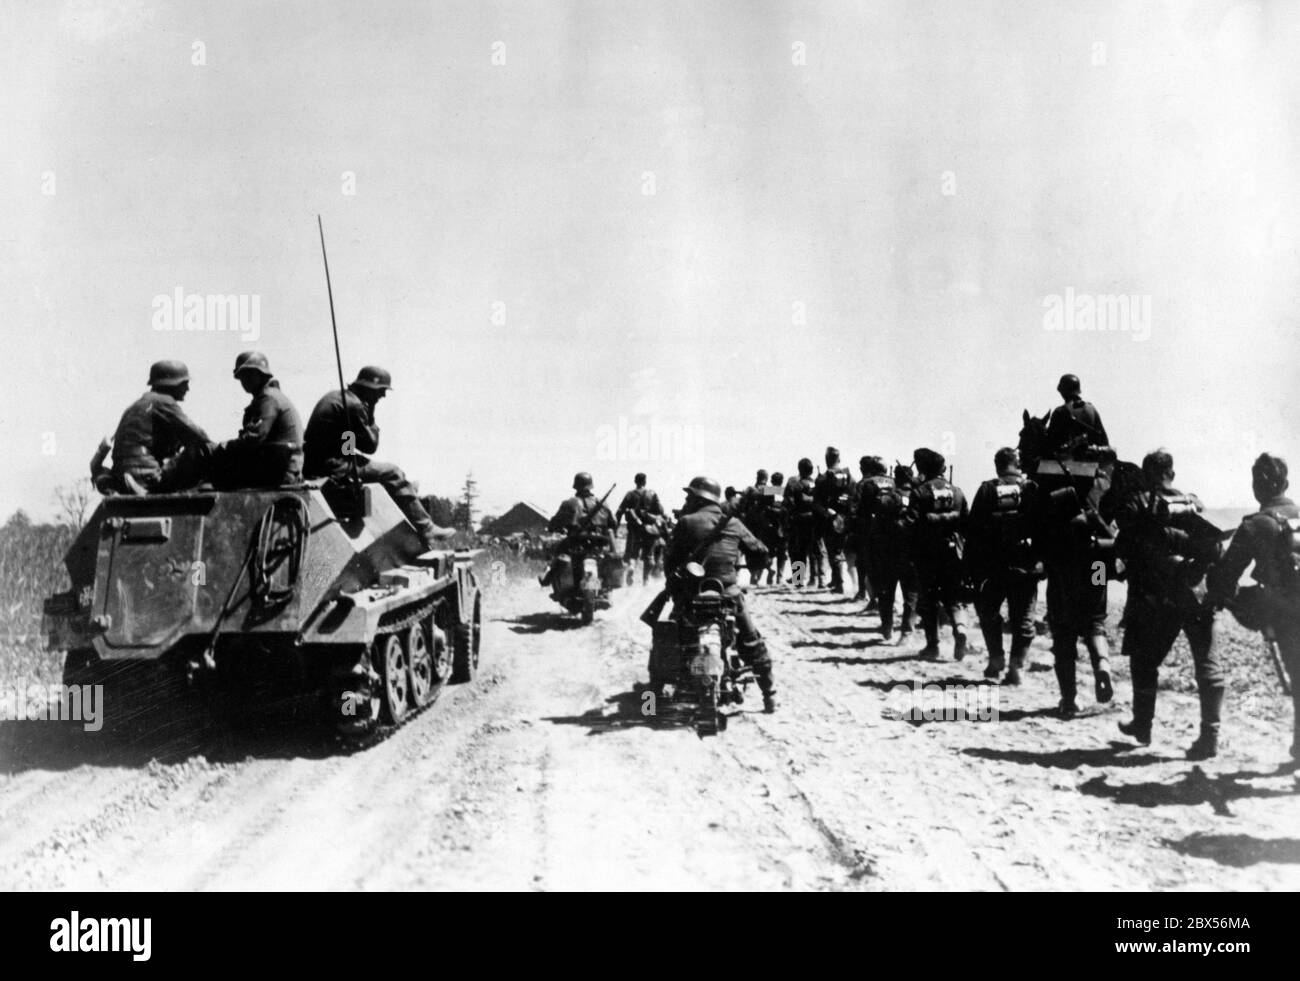 German infantry and an Sd.Kfz. 250 (Schuetzenpanzerwagen Sd.Kfz. 250) infantry fighting vehicle (left) on the advance near Virbalis (German: Wirballen) on the border to Lithuania. Area Army Group North (Heeresgruppe Nord). Stock Photo